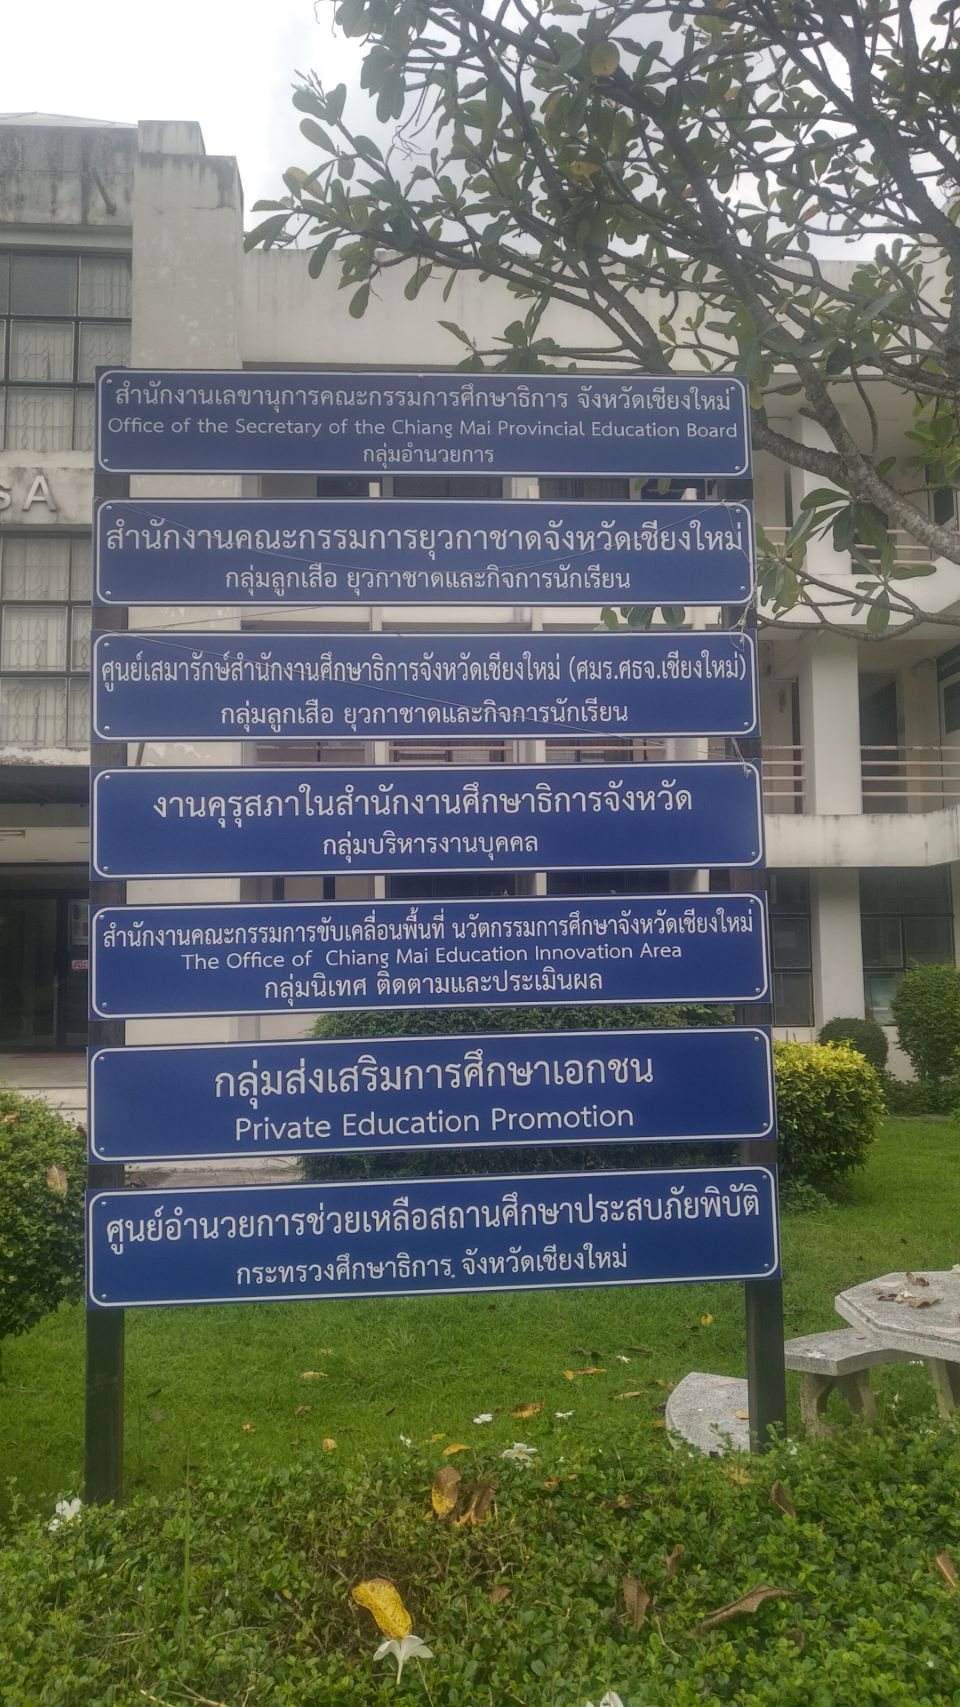 Chiang Mai Provincial Education Office